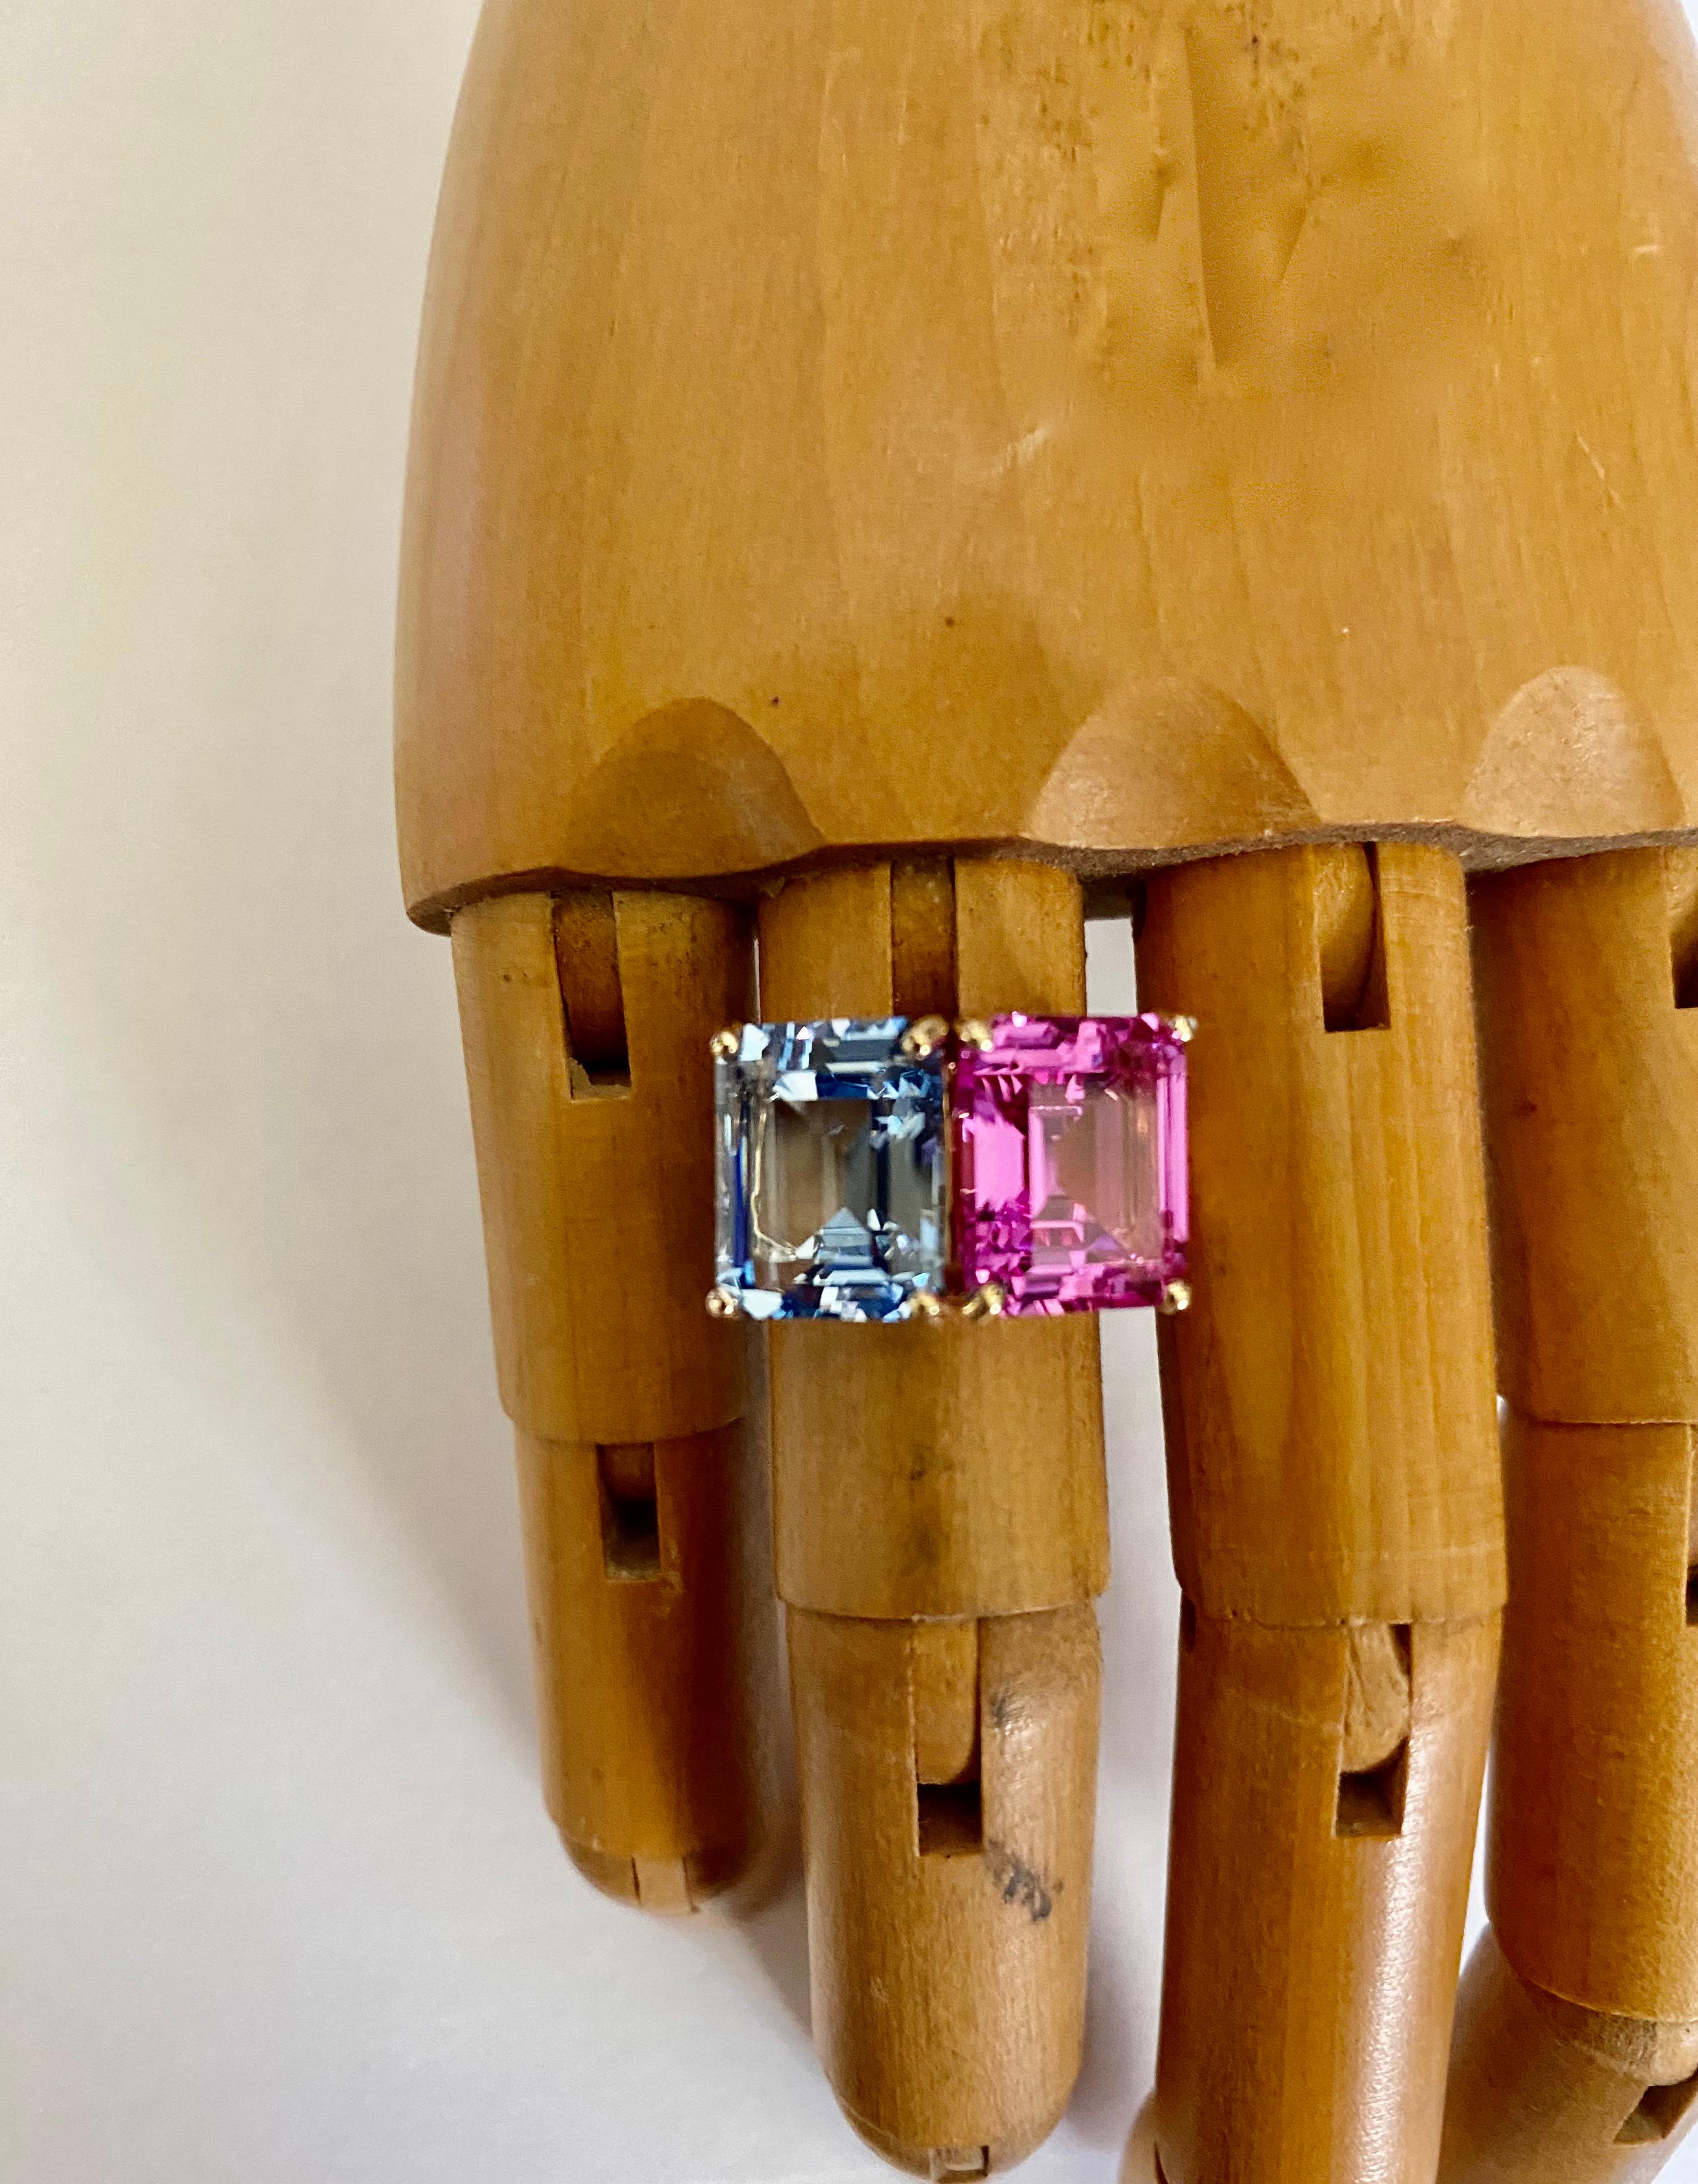 Aquamarine is paired with pink topaz in this Due Gemme ring.  The aquamarine is a classic aqua blue color and is well cut and polished.  The pink topaz is Bazooka Bubble Gum pink and is also expertly cut and polished.  The perfectly matched pair of